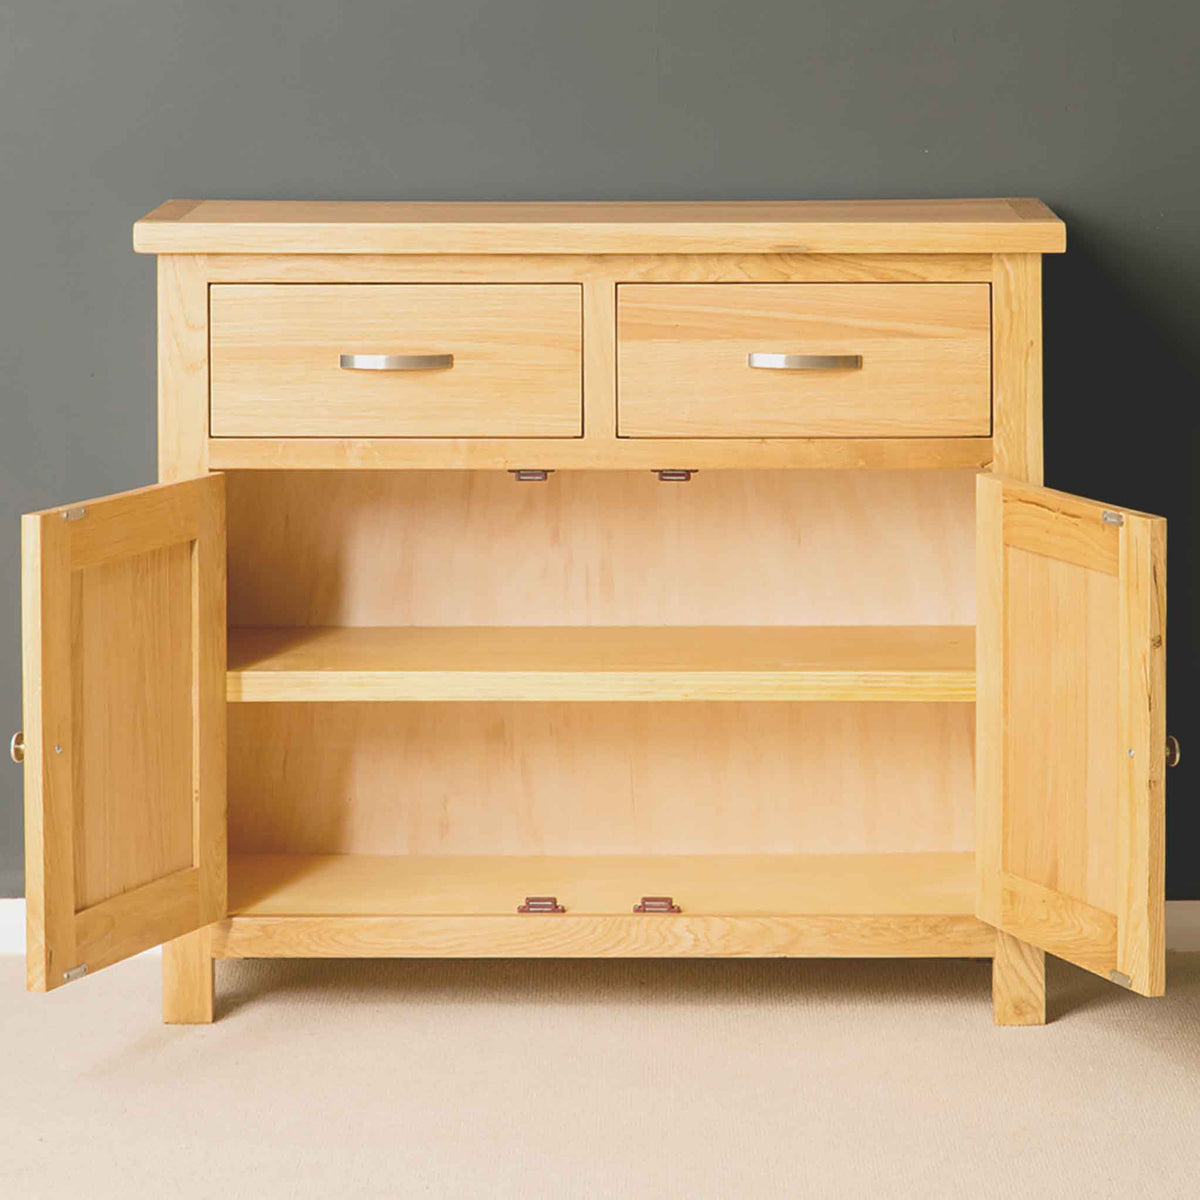 London Oak Small Sideboard - Front view with doors open